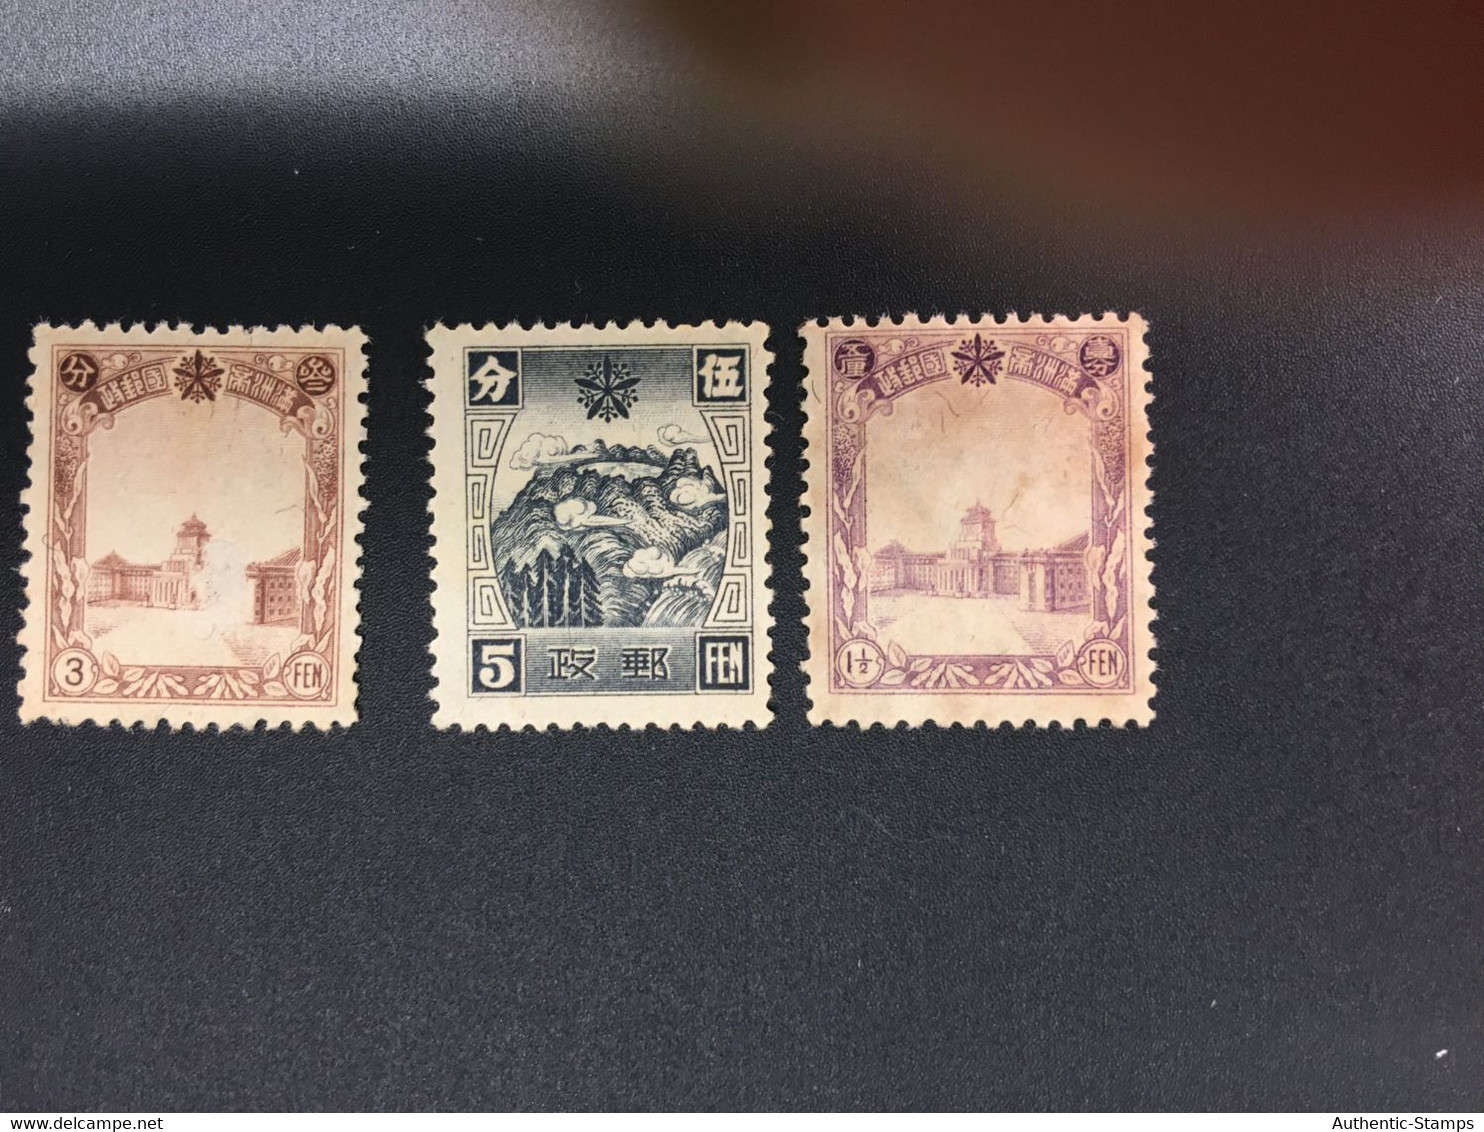 CHINA STAMP,  TIMBRO, STEMPEL,  CINA, CHINE, LIST 8565 - 1932-45 Mandchourie (Mandchoukouo)